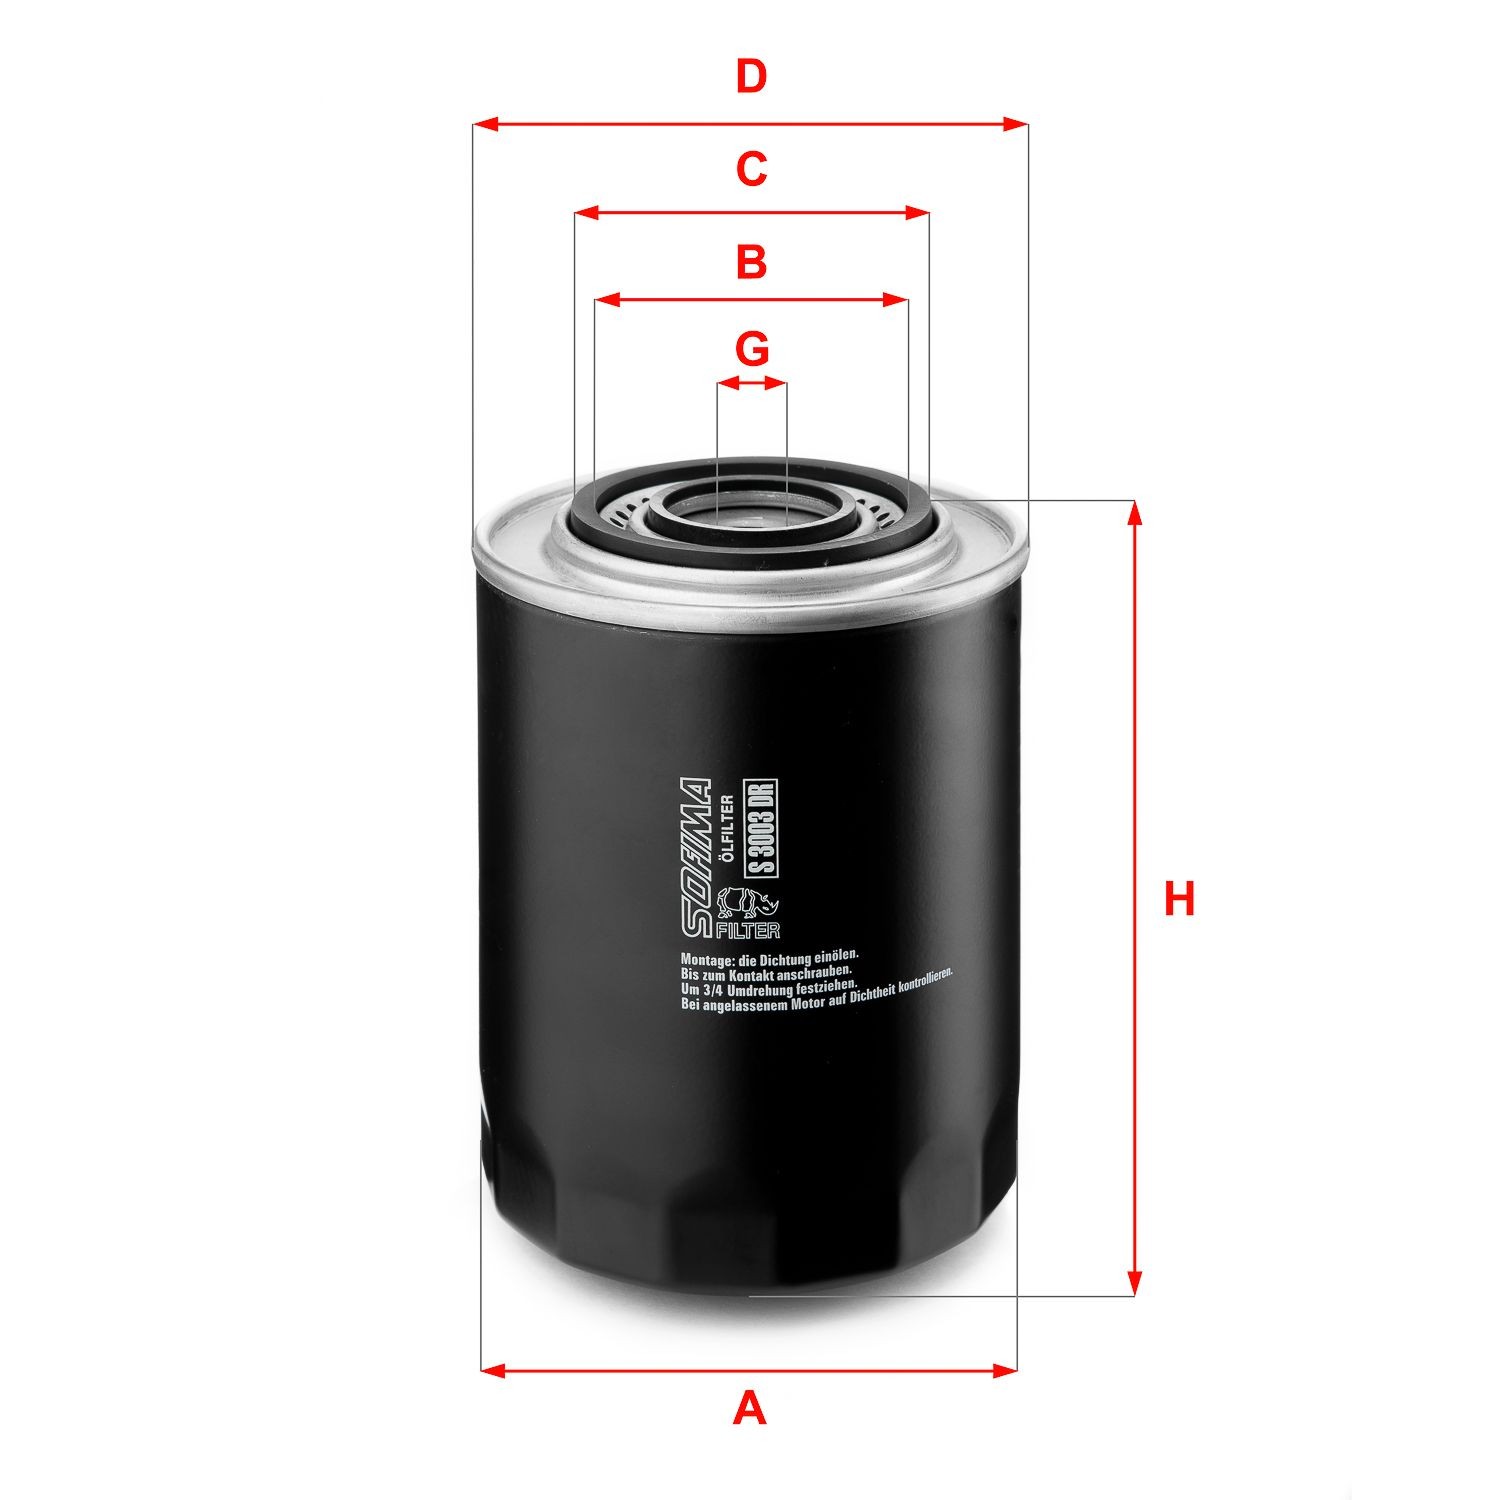 SOFIMA S 3003 DR Oil filter 3/4-16 UNF, with one anti-return valve, Spin-on Filter